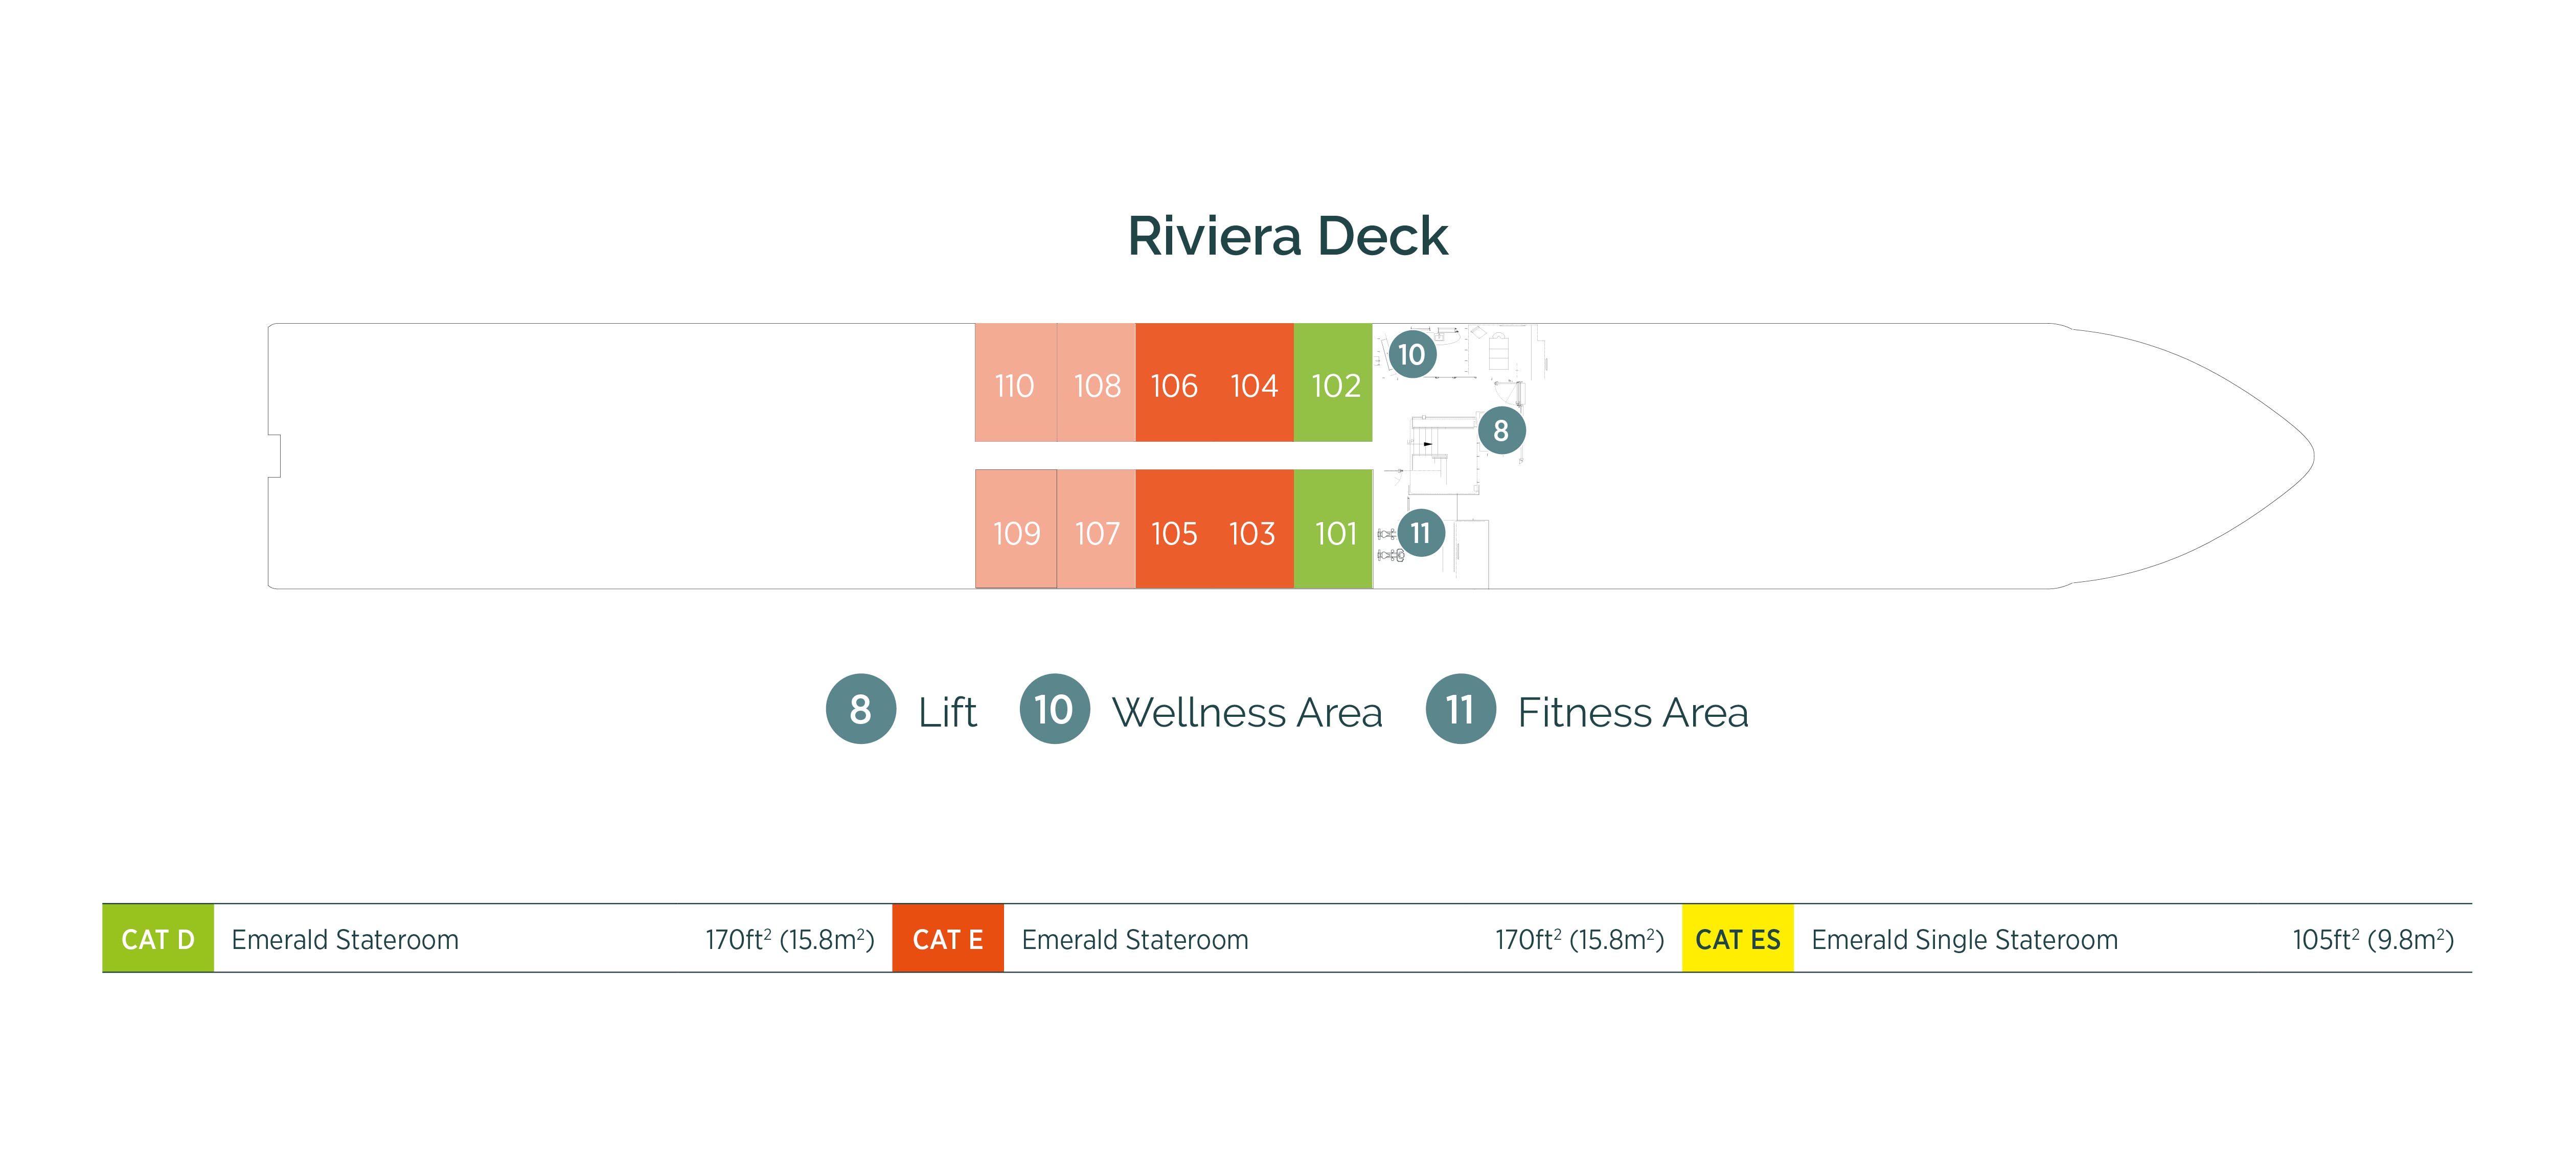 Diagram of ship layout for the Riviera Deck of Emerald Cruises’ Douro river cruising Star-Ship, Emerald Radiance